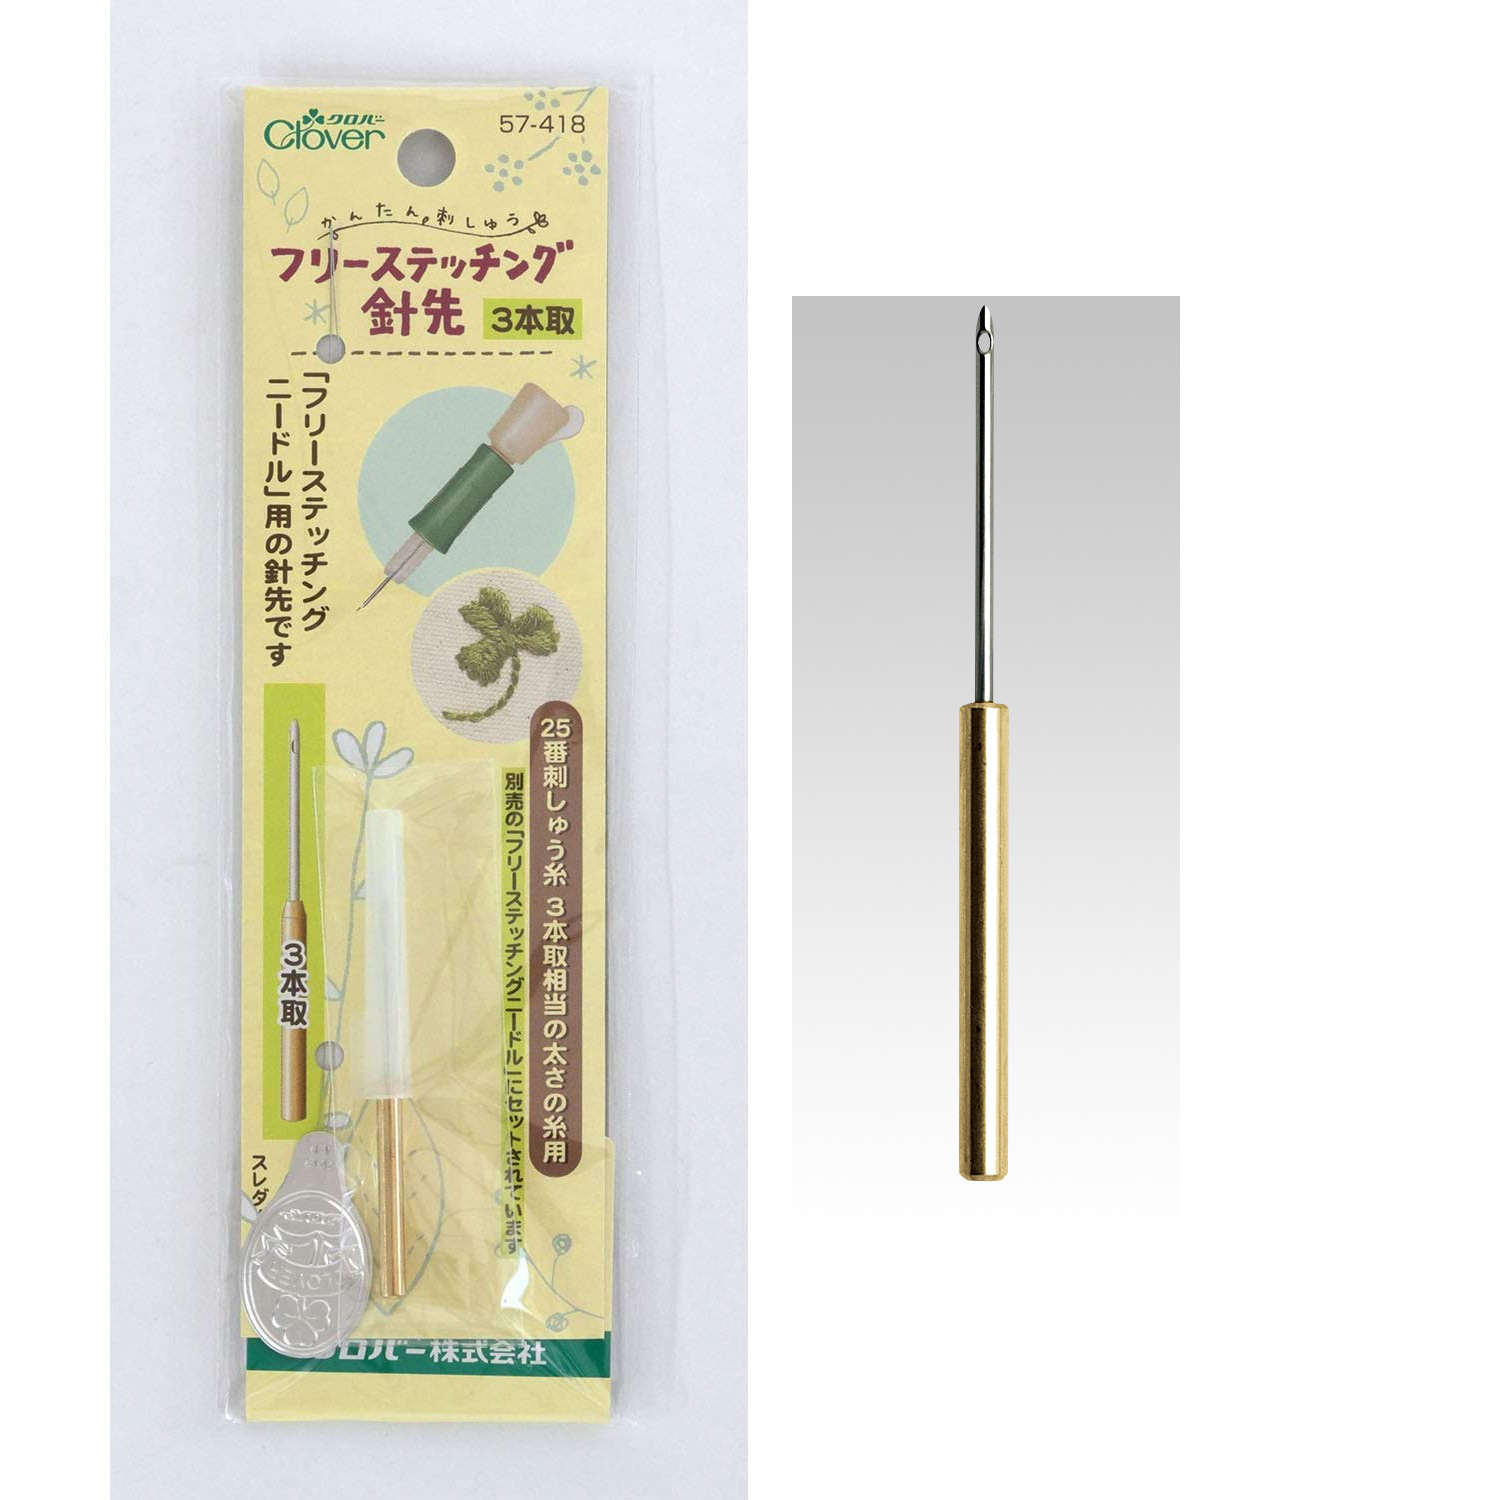 CL57-418 Easy Embroidery Stitching Needle Refills"", 3pcs (pcs)